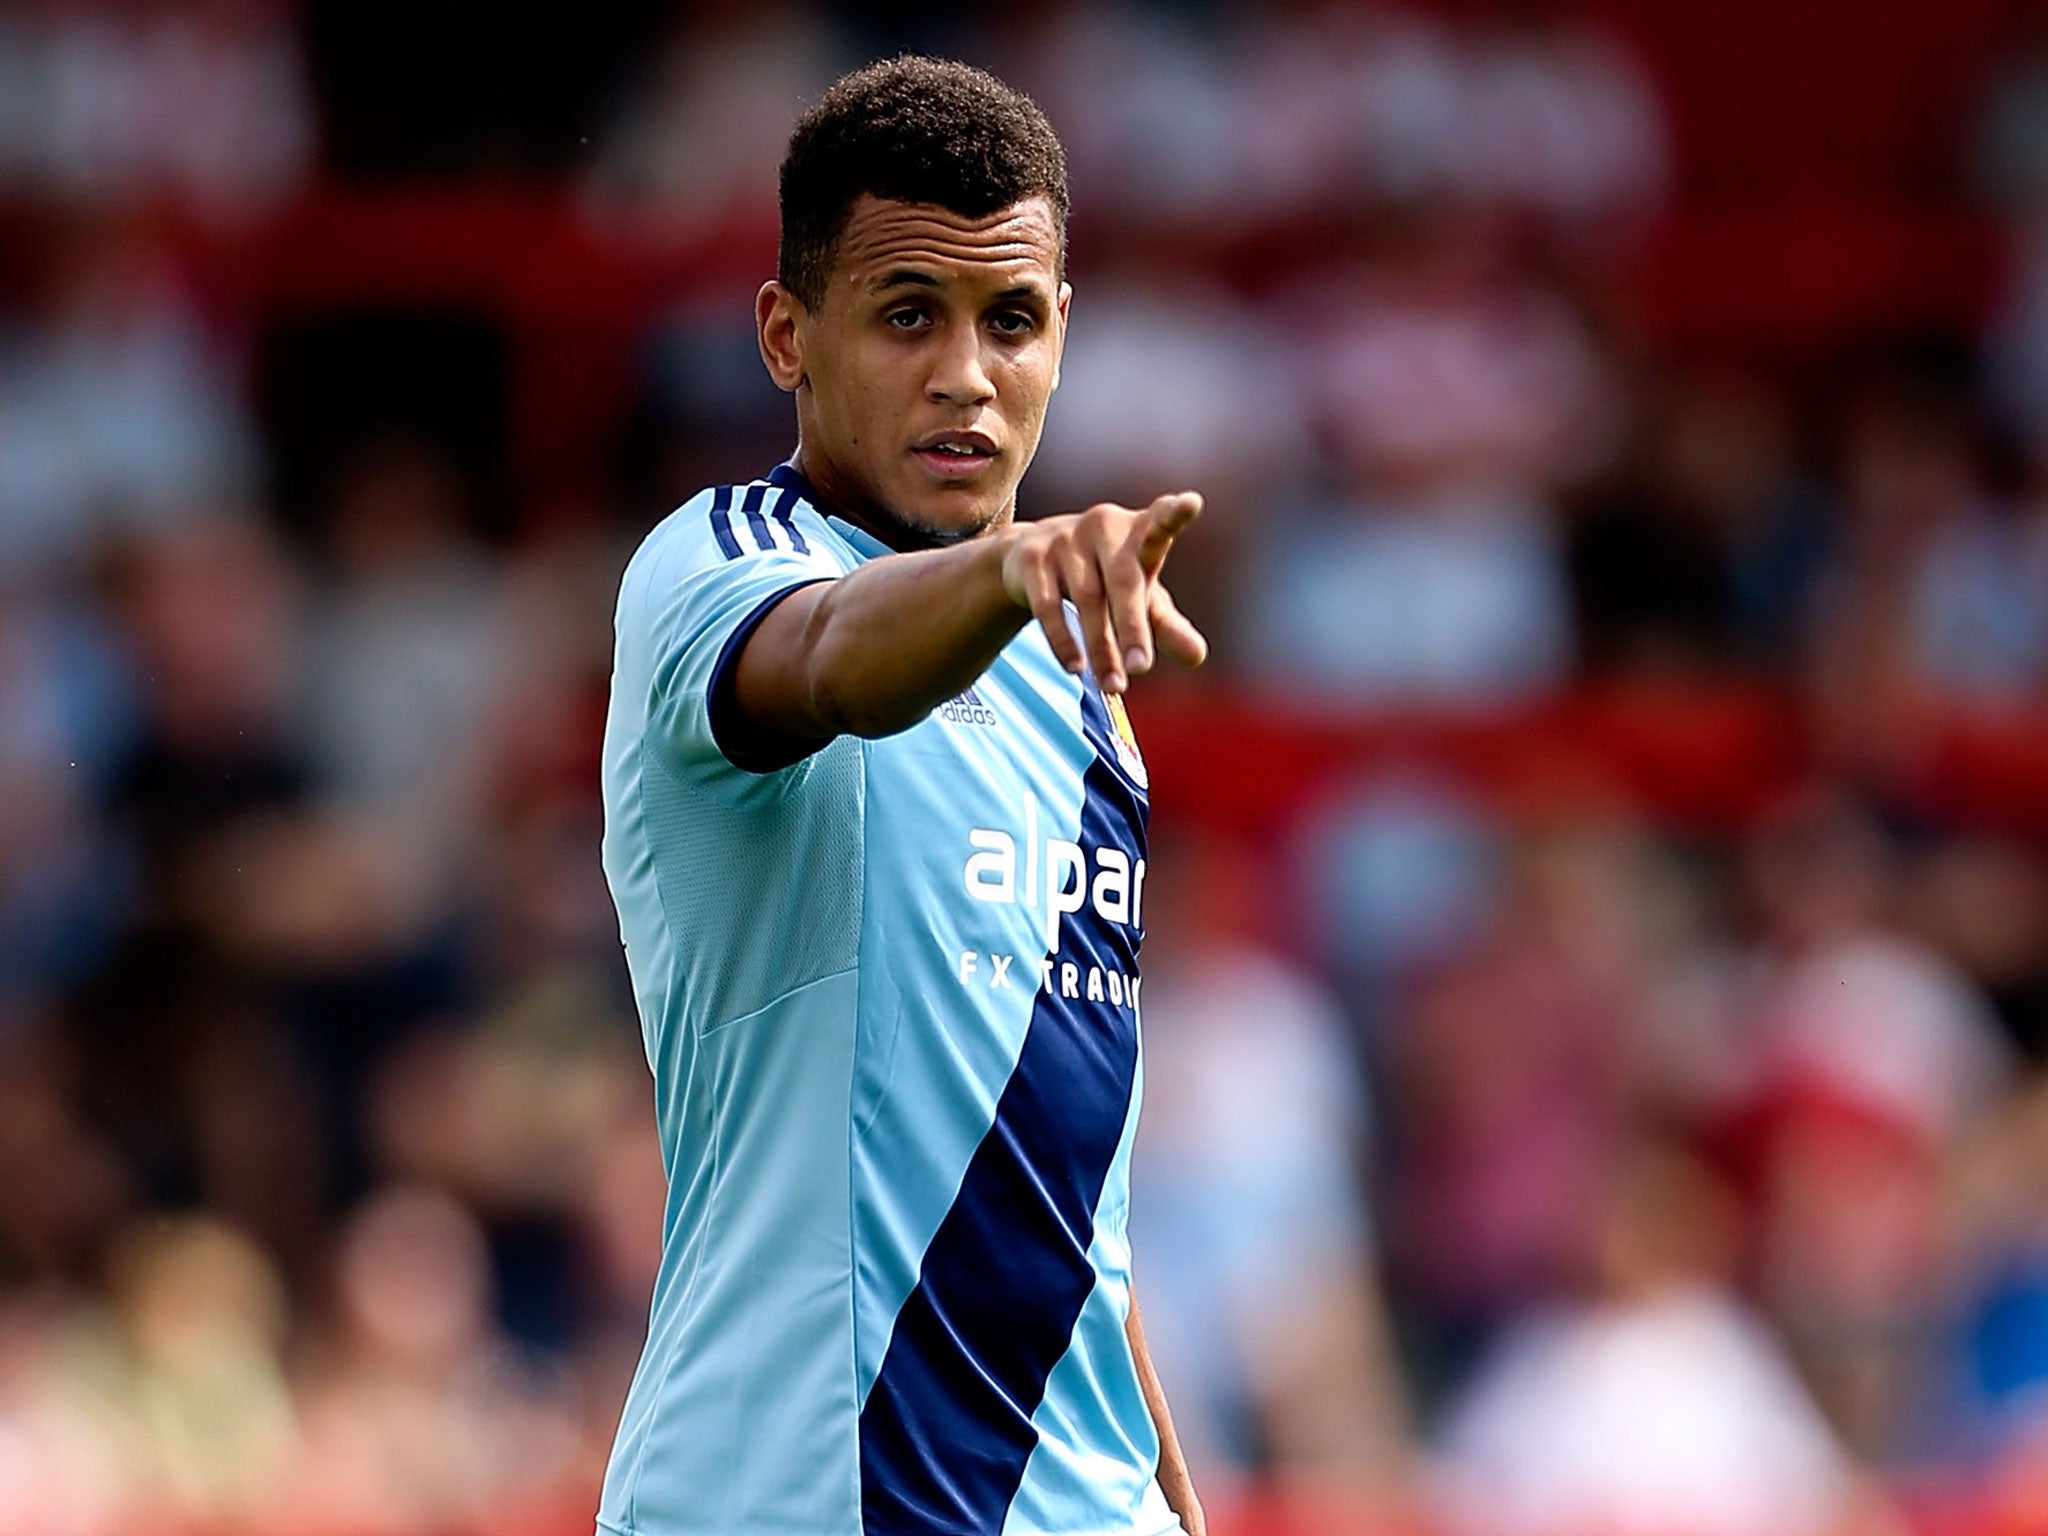 Ravel Morrison has been charged with the assault of two women